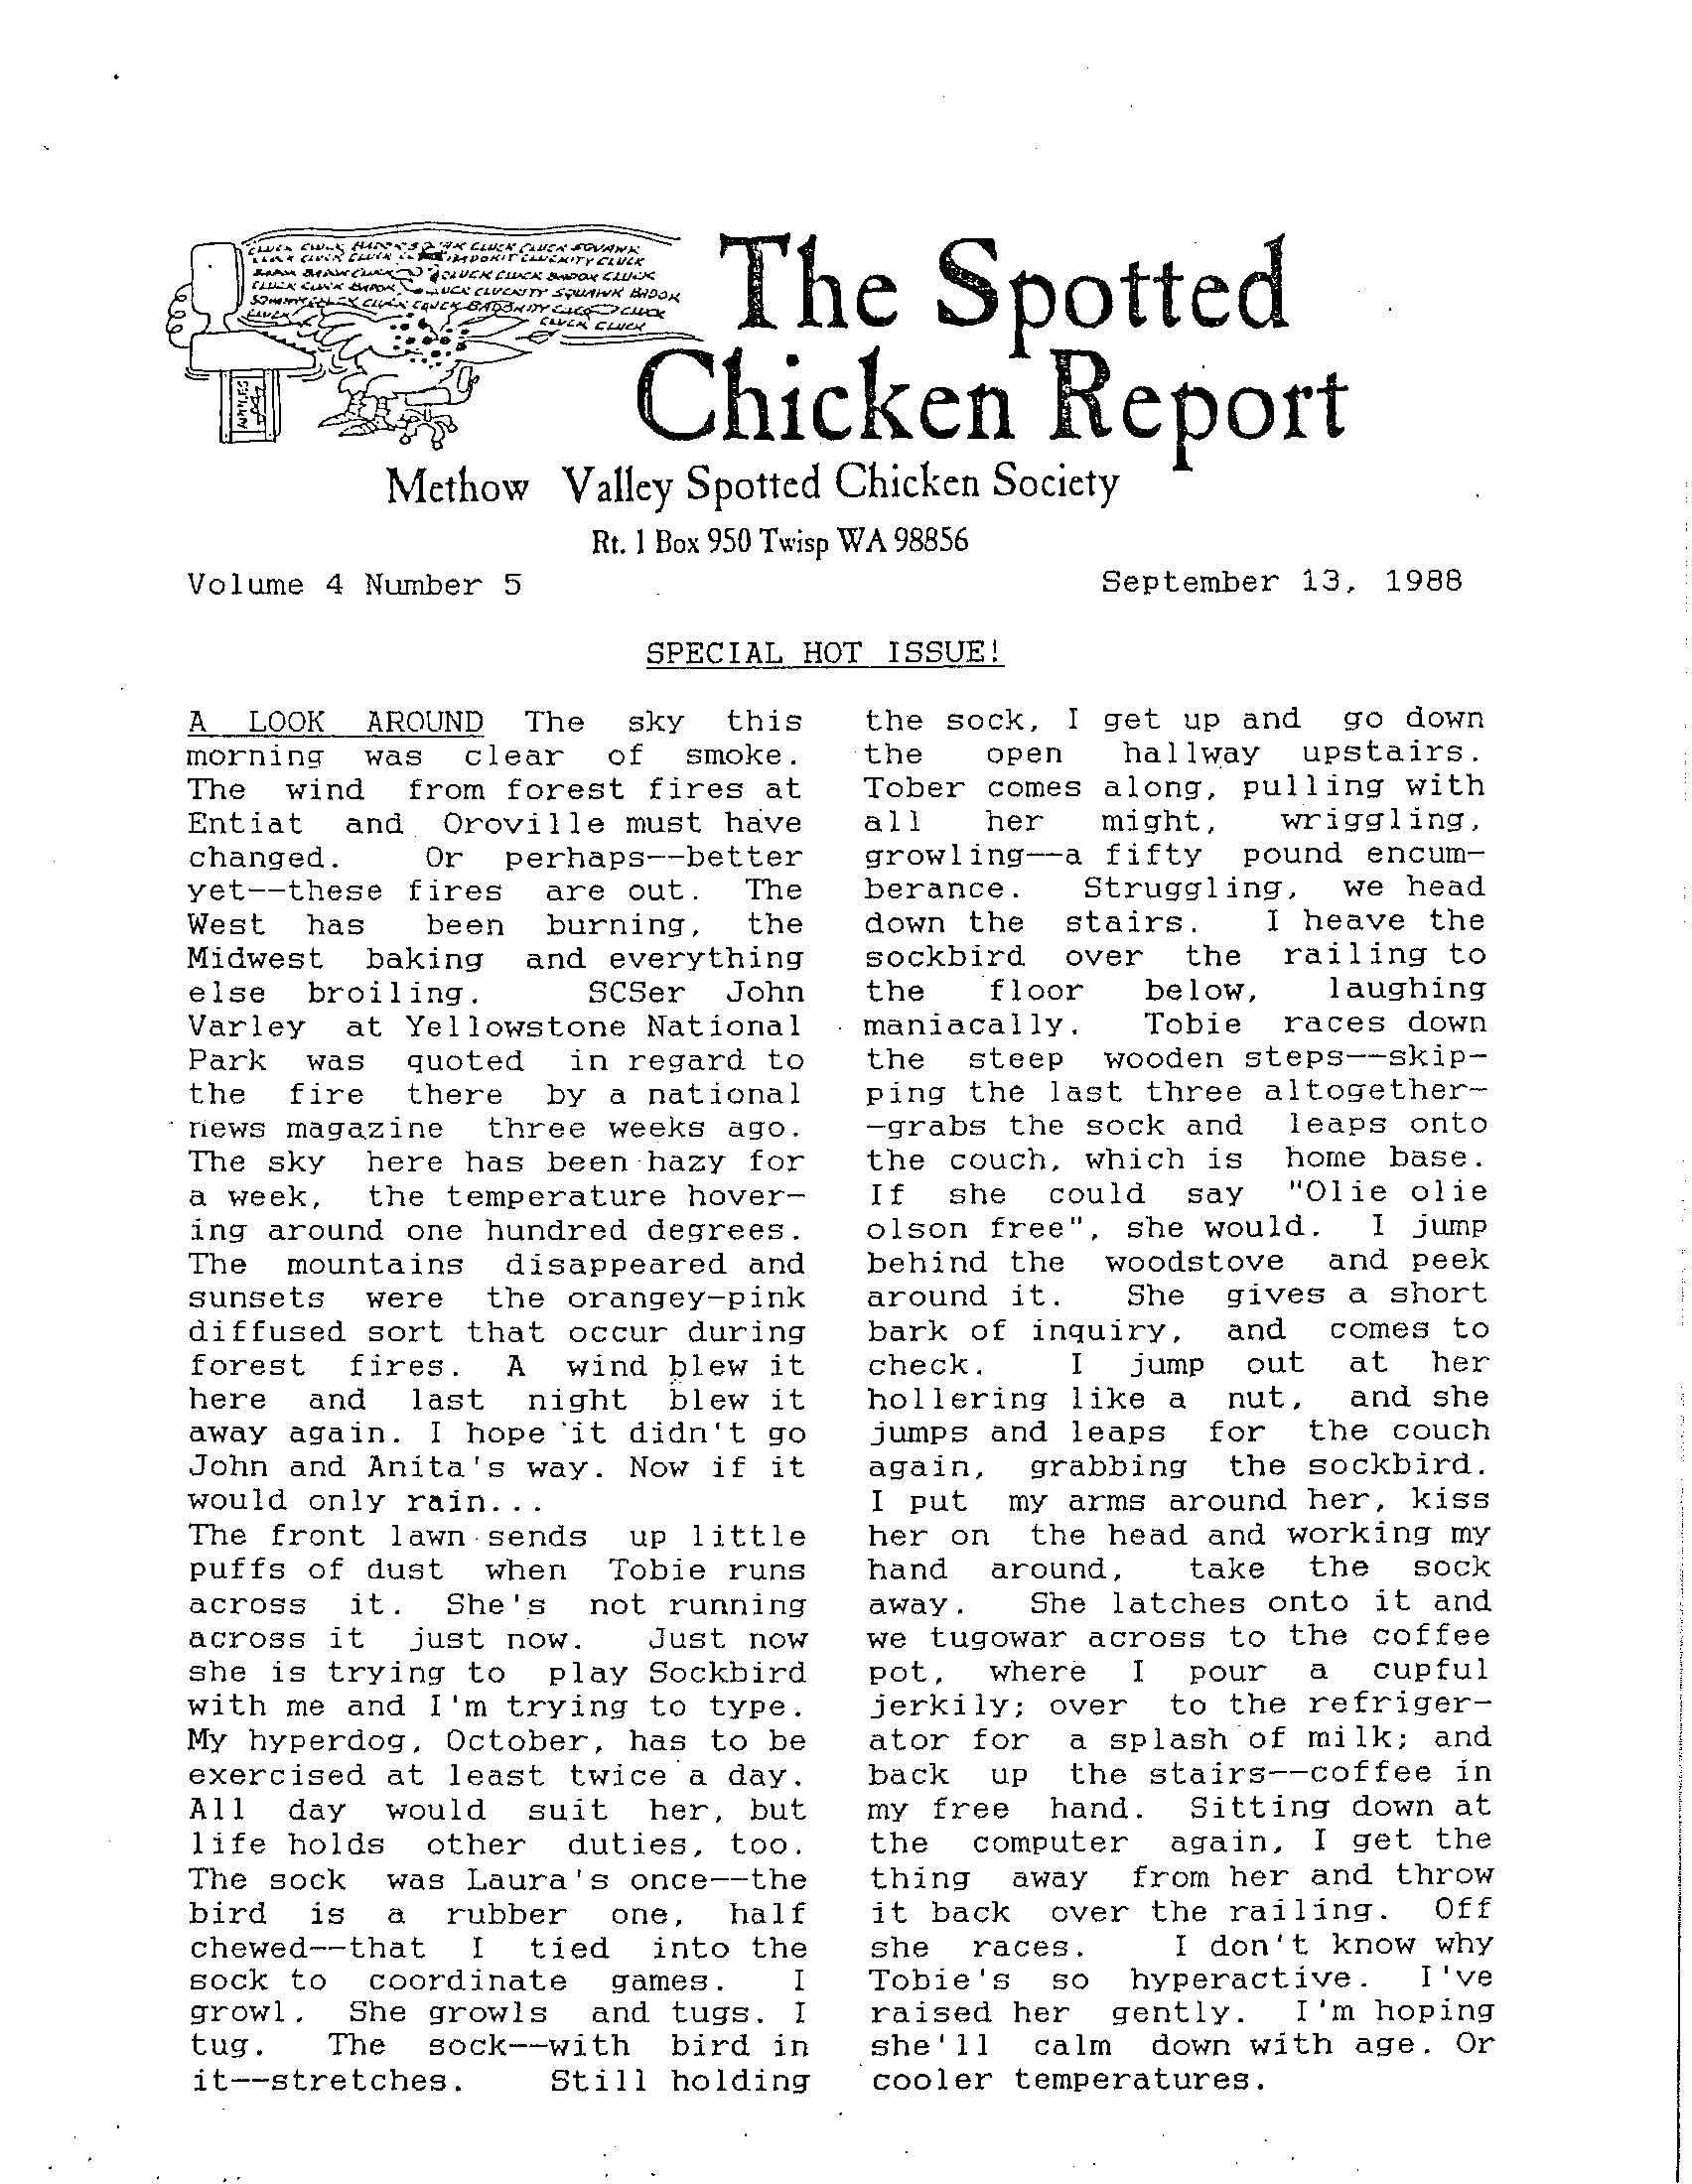 The Spotted Chicken Report_Page_073.png